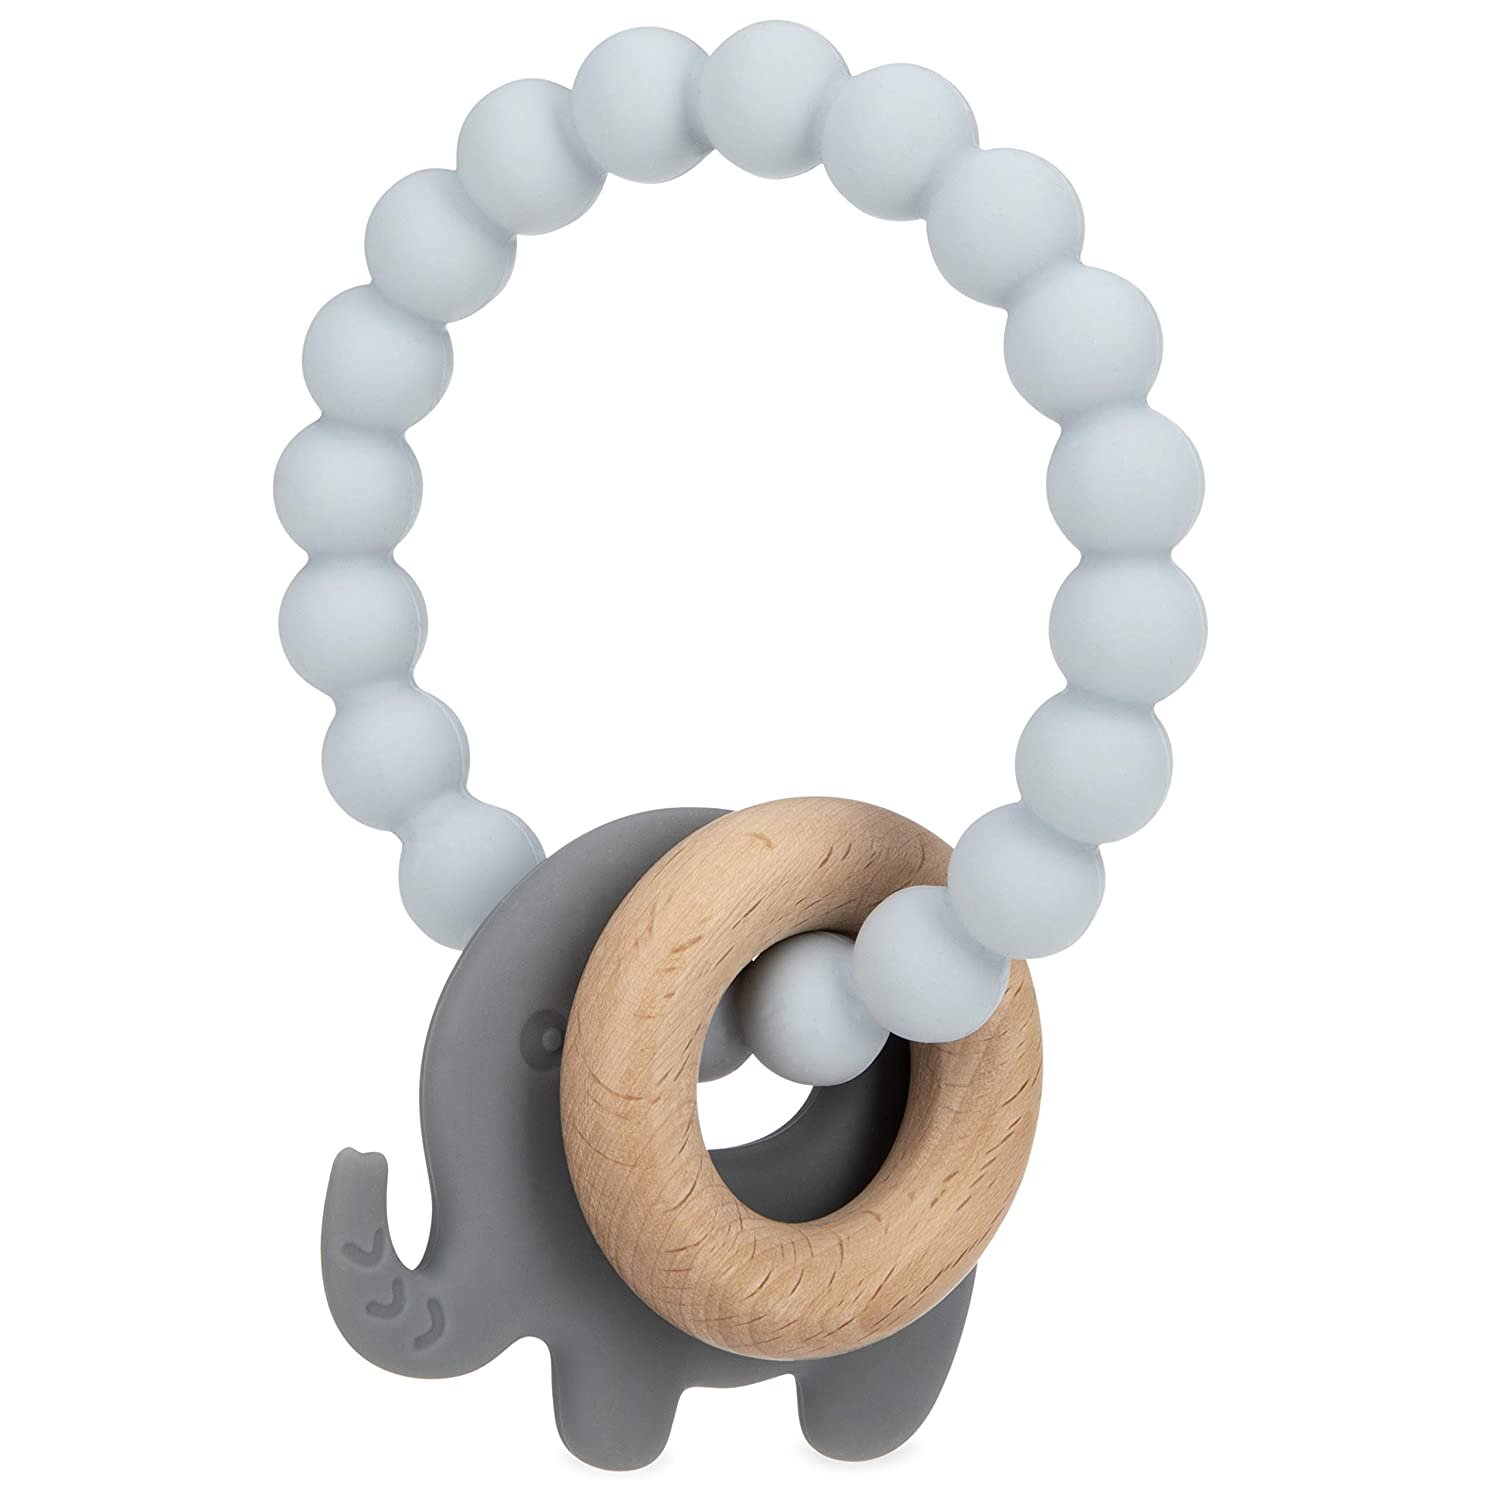 Nuby Natural Teether Silicone Key-Ring Design with Wooden Hoop, Elephant - image 2 of 3